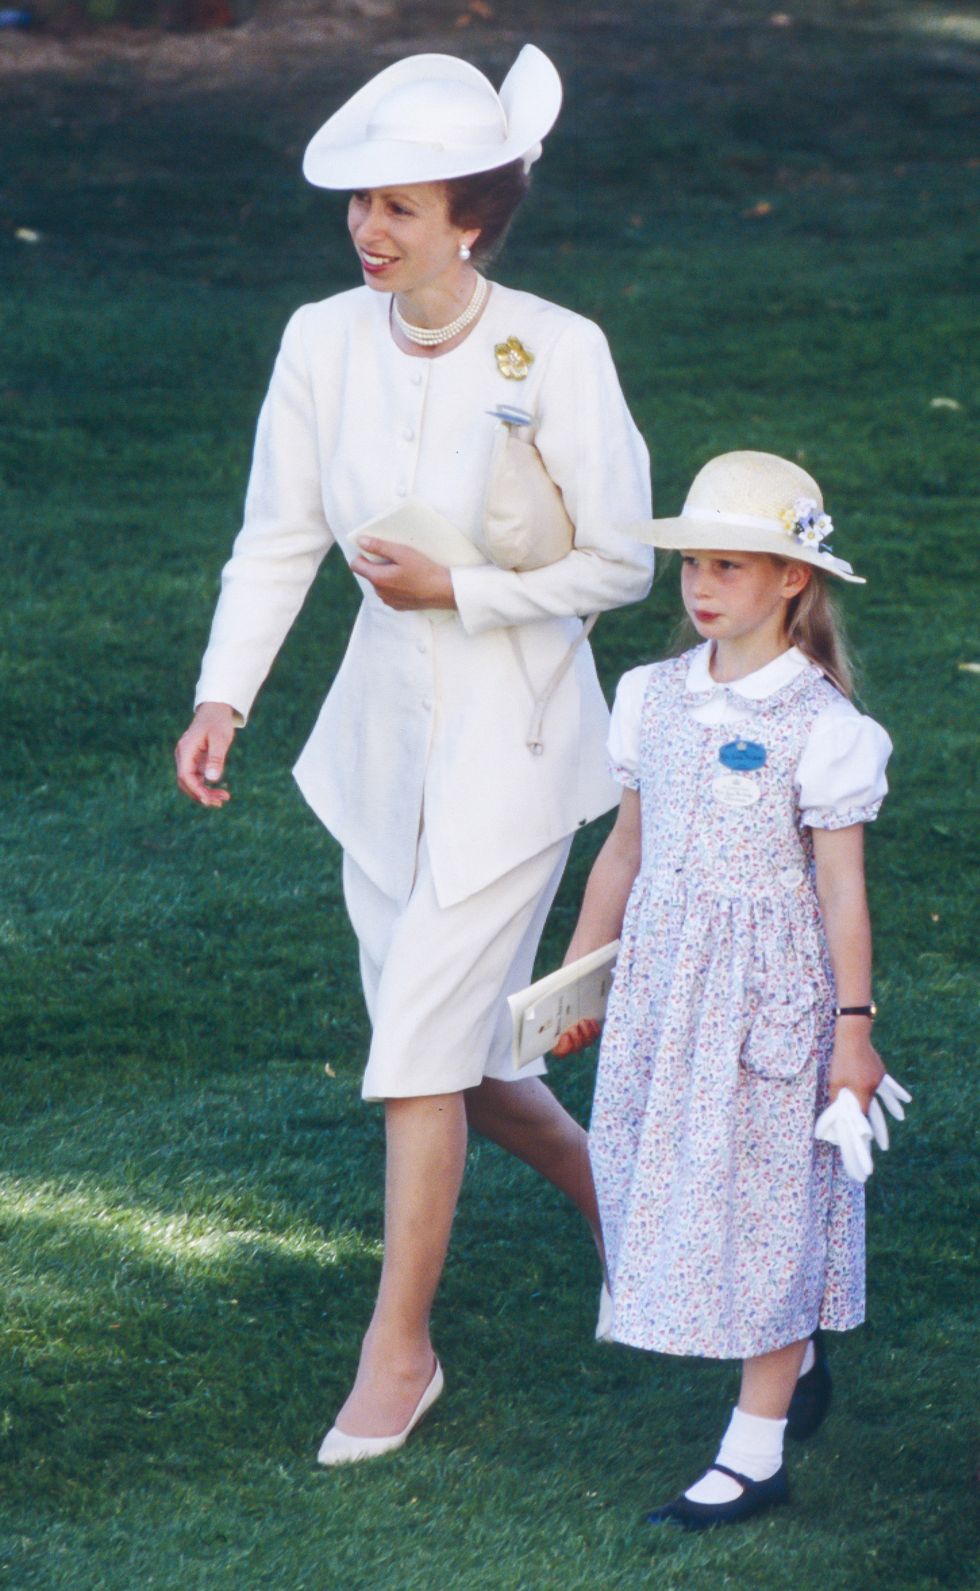 members of the royal family attend the royal ascot race meeting 1989